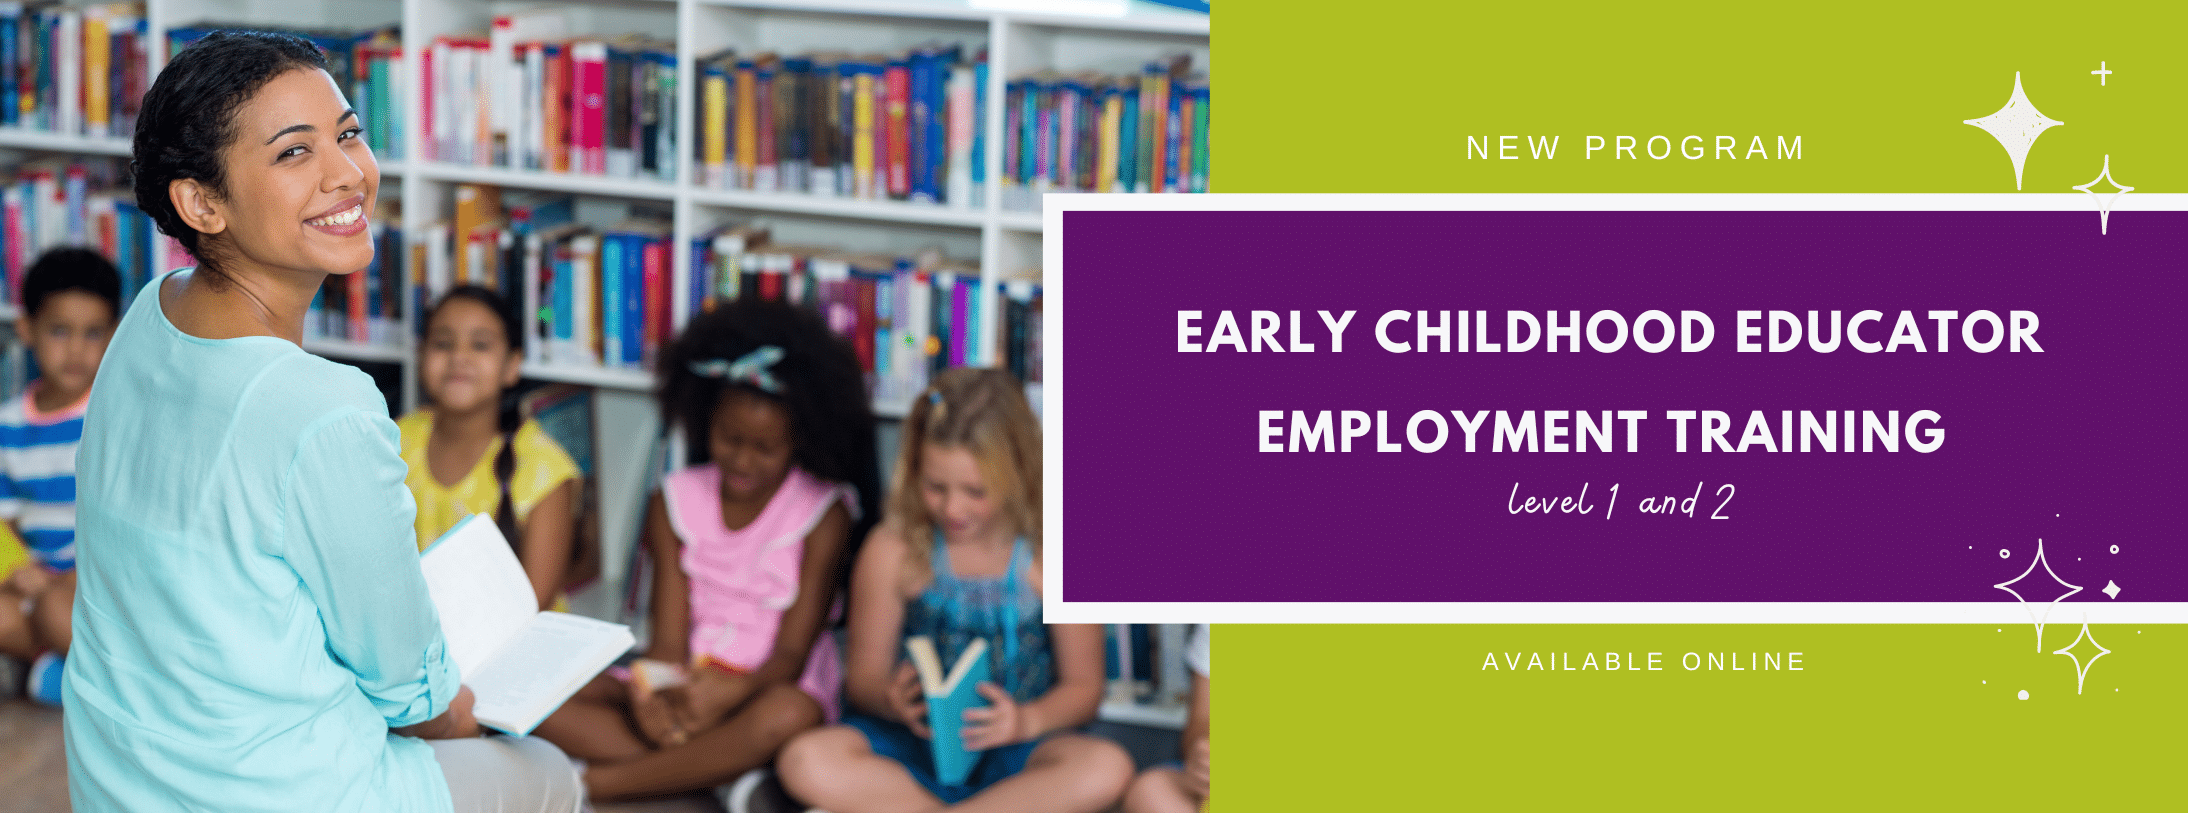 Free training for Early Childhood Educators